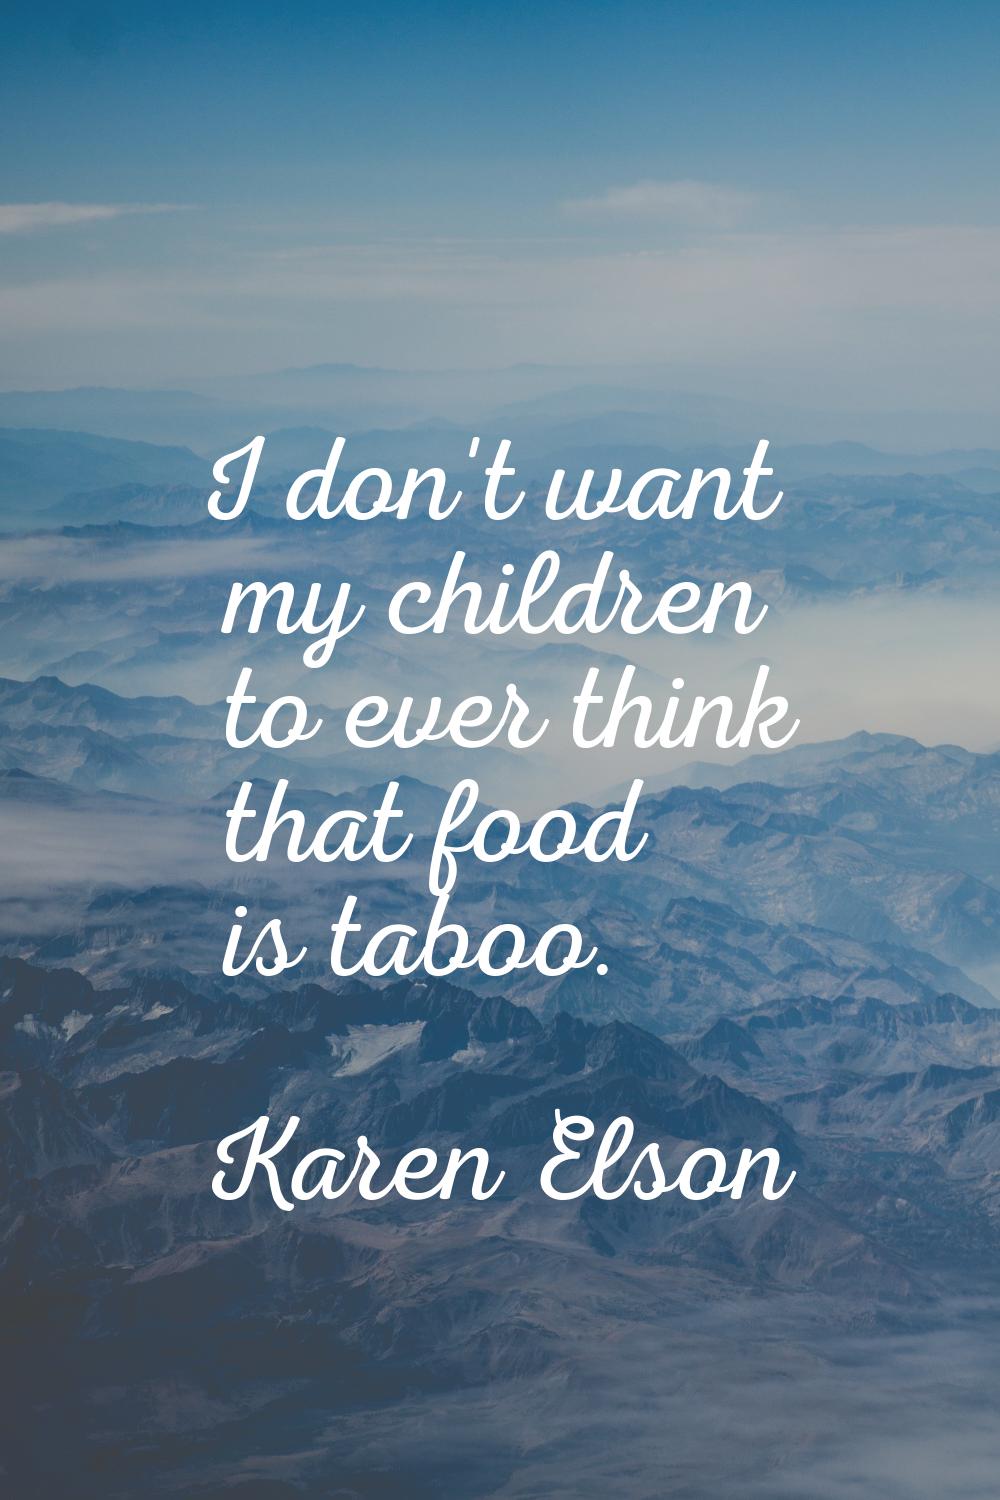 I don't want my children to ever think that food is taboo.